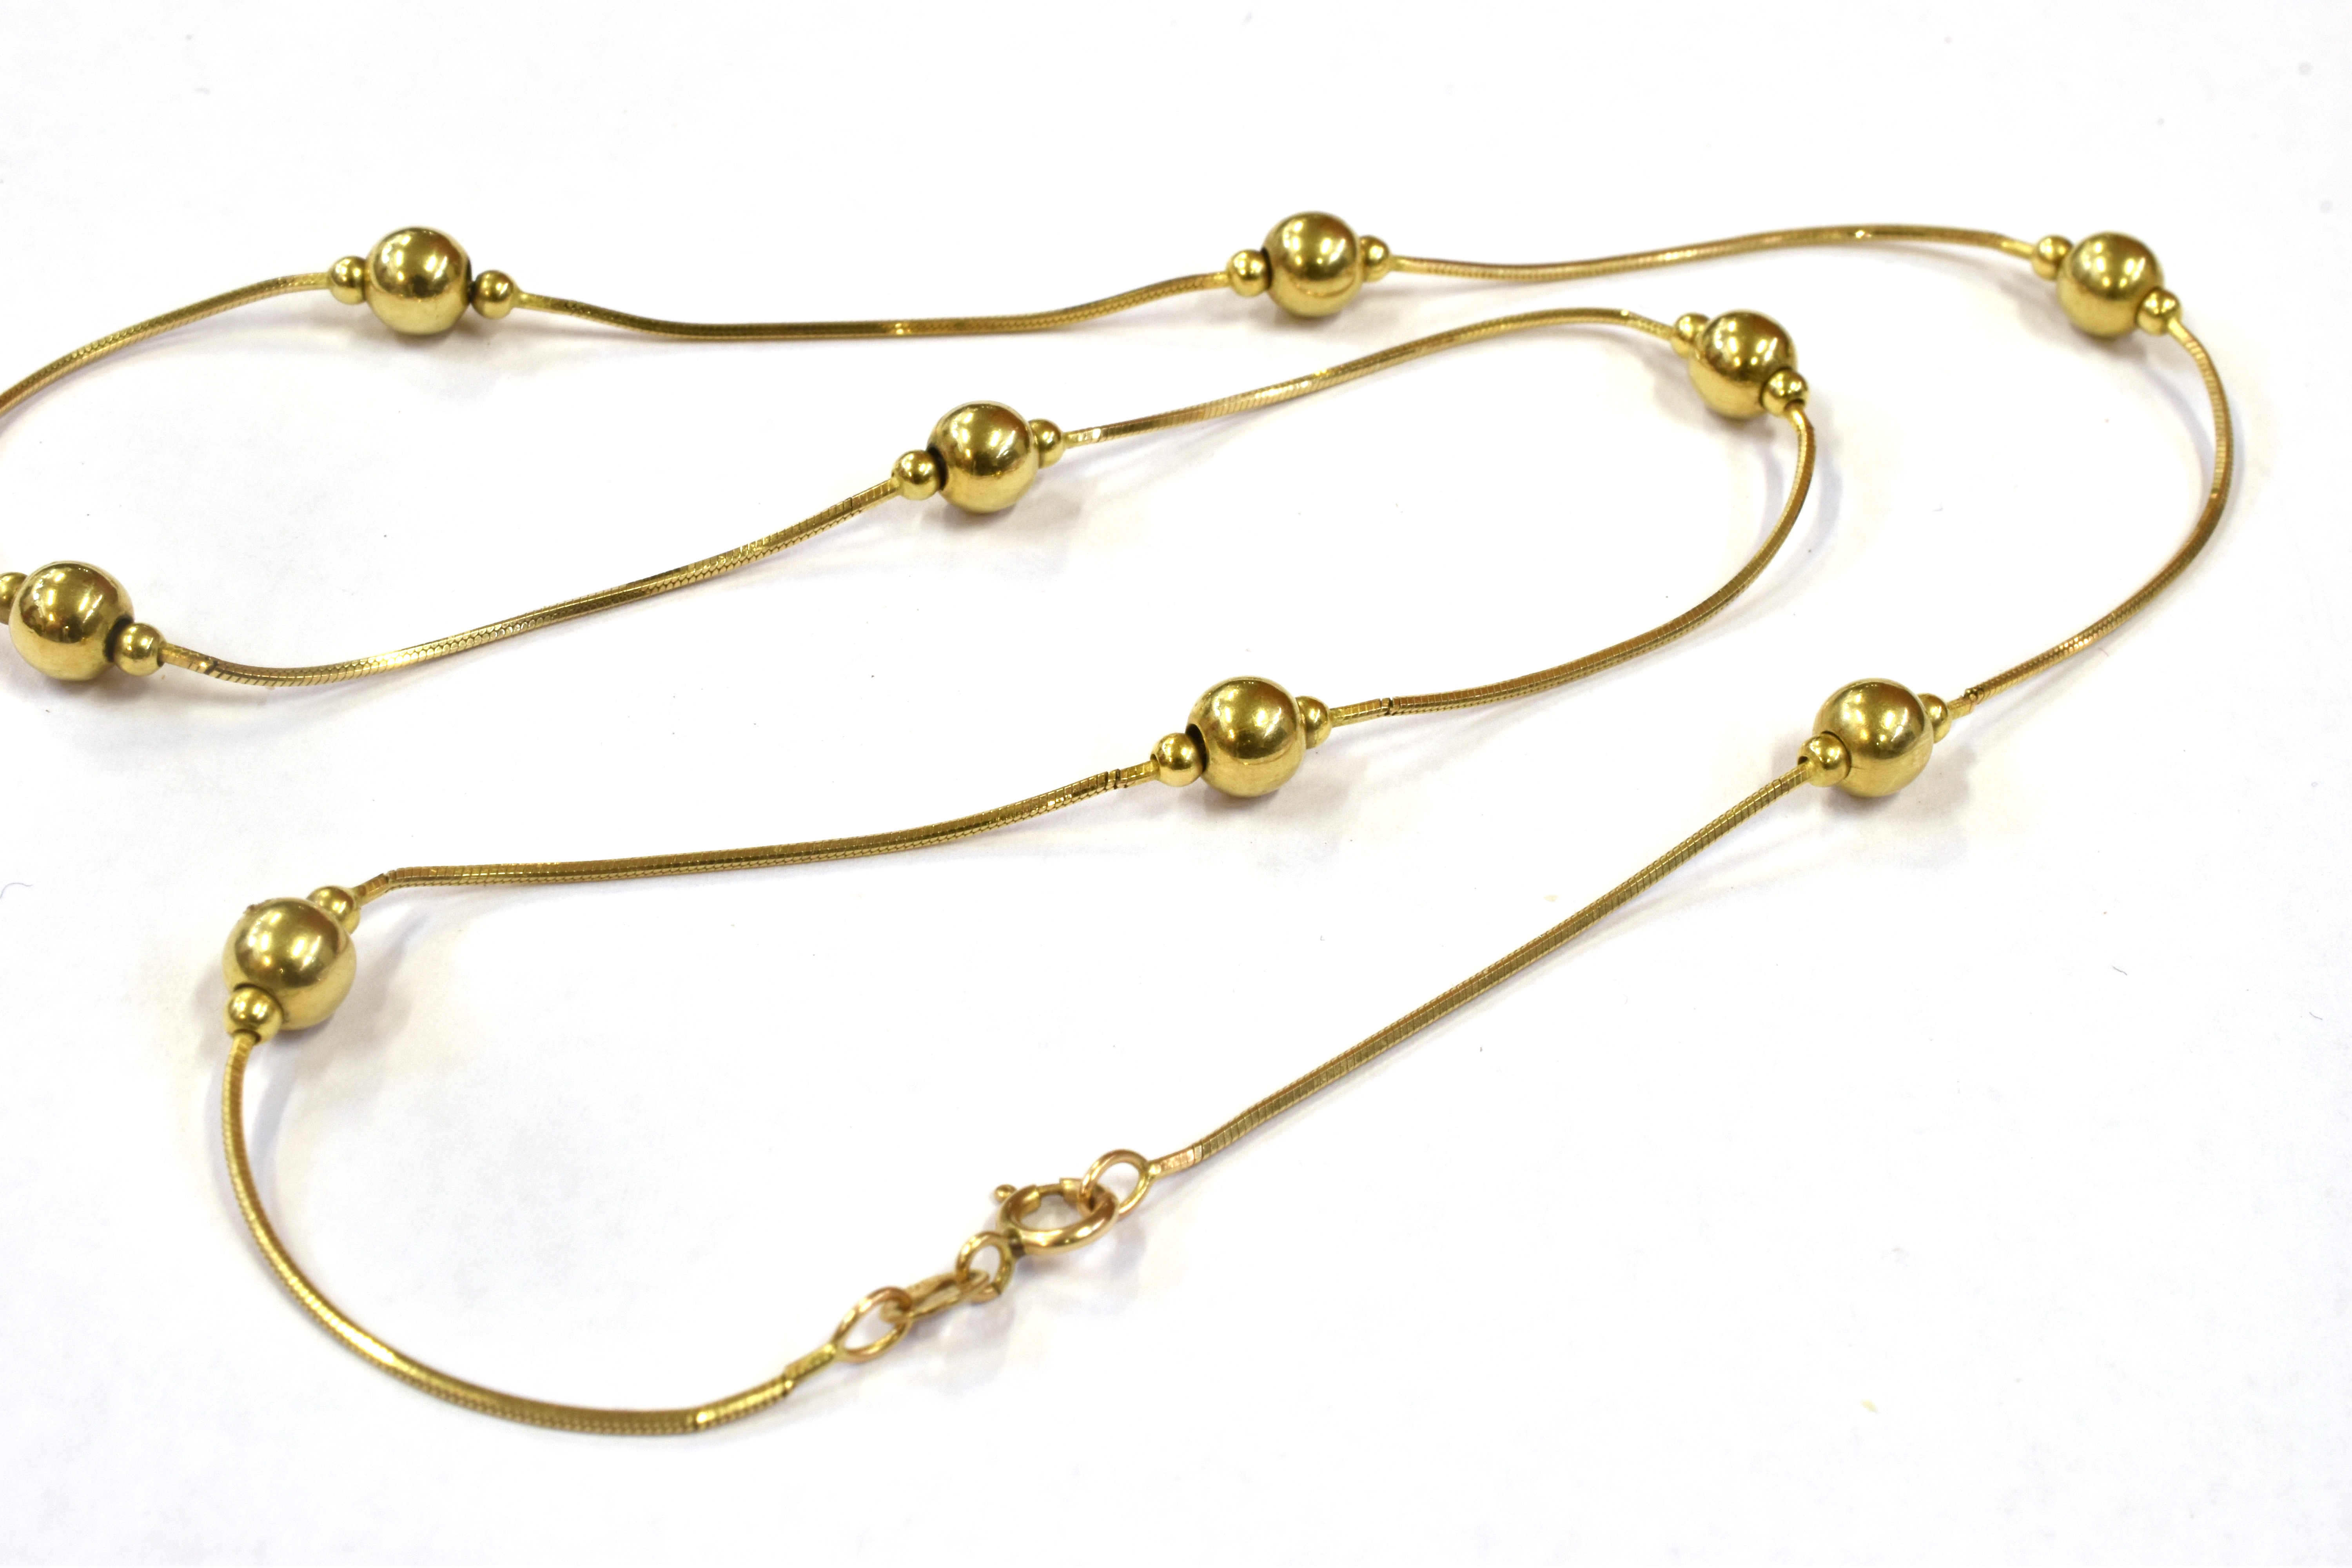 A HALLMARKED 9CT GOLD COLLARETTE The fine snake link chain with 9 round gold bead spacers, 16 inches